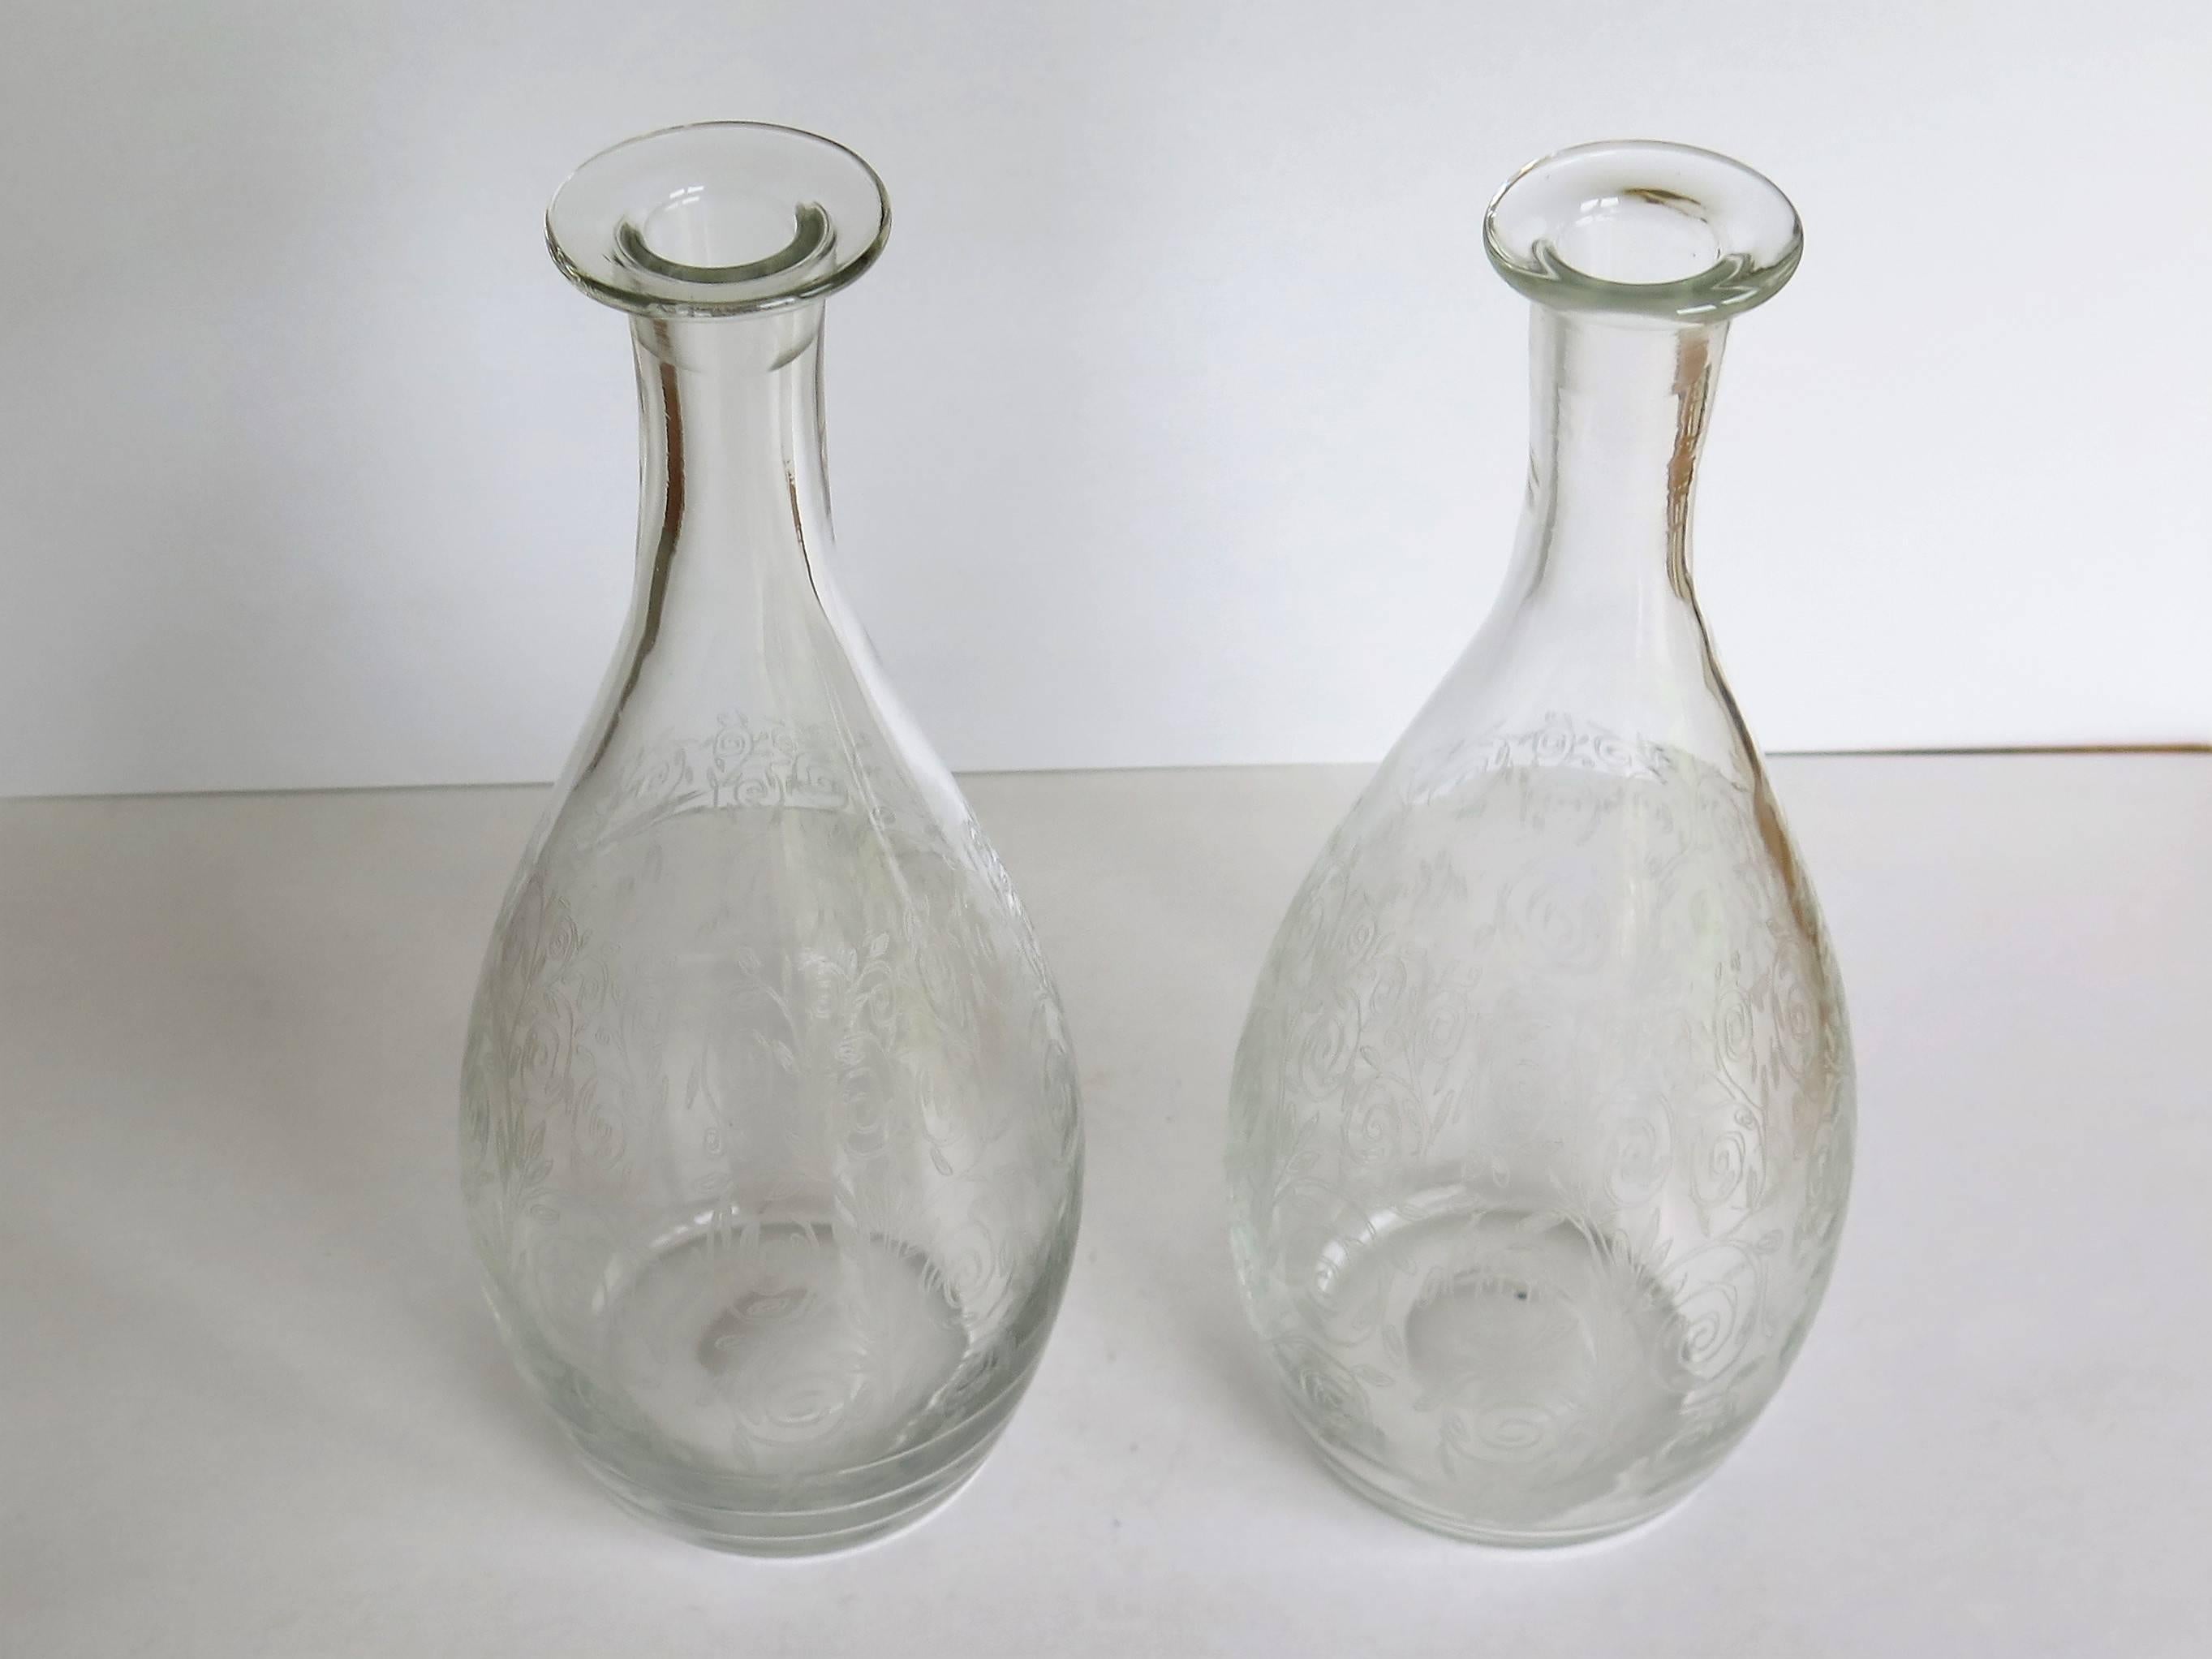 English Fine Pair of Glass Carafes, Jugs or Vases Hand-blown and engraved, Late 19th C.